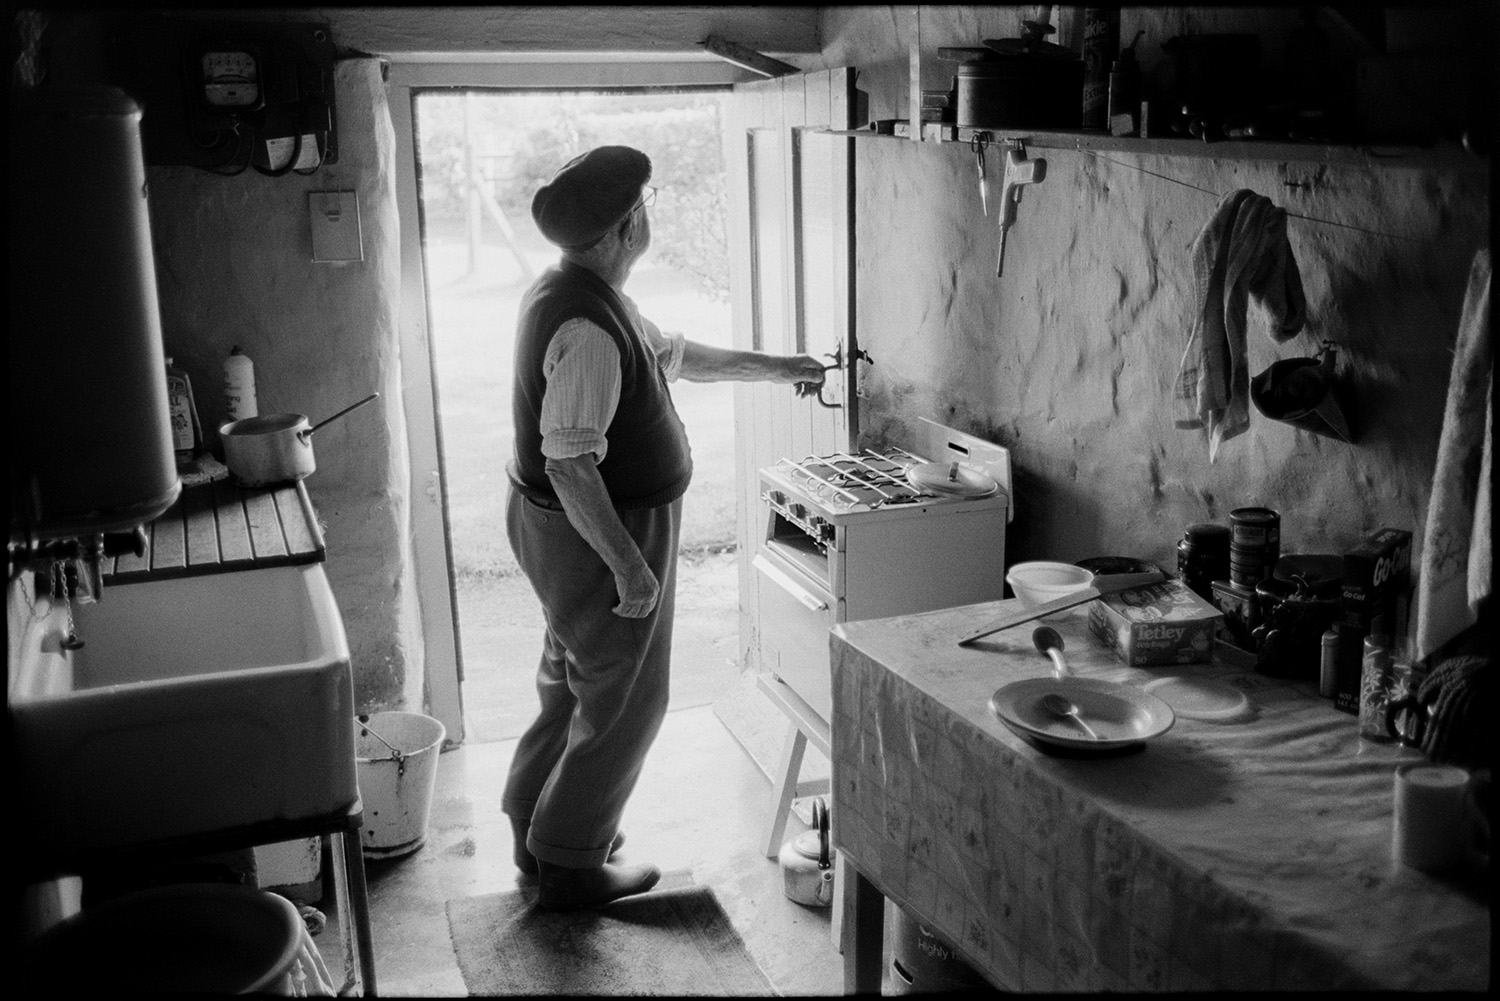 Elderly man standing in his kitchen, side table sink and gas cooker.
[Jack Buckingham at Bottreaux Mill, Molland, standing in his kitchen with a small table, gas cooker, buckets, sink and water heater. He is looking through an open door to the garden beyond.]